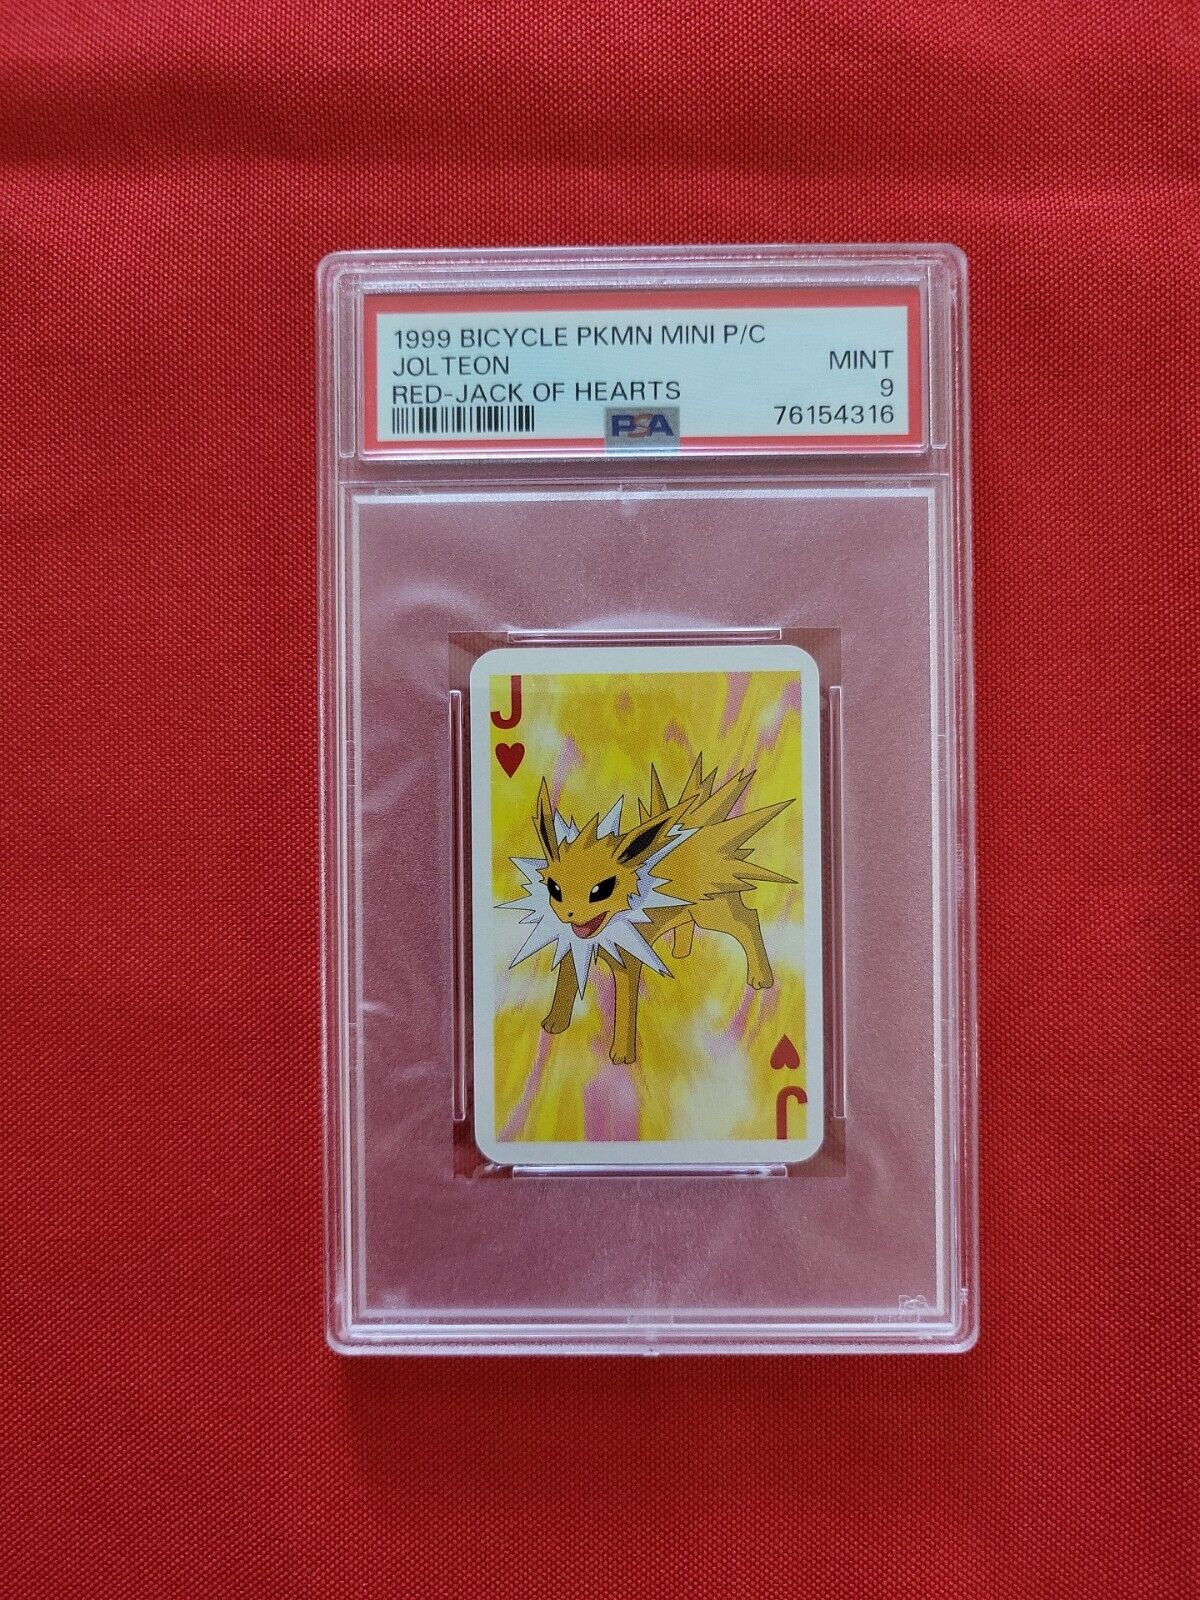 Bicycle Pokemon Mini Poker Playing Cards Jolteon Ace of Hearts Red - PSA 9 Mint